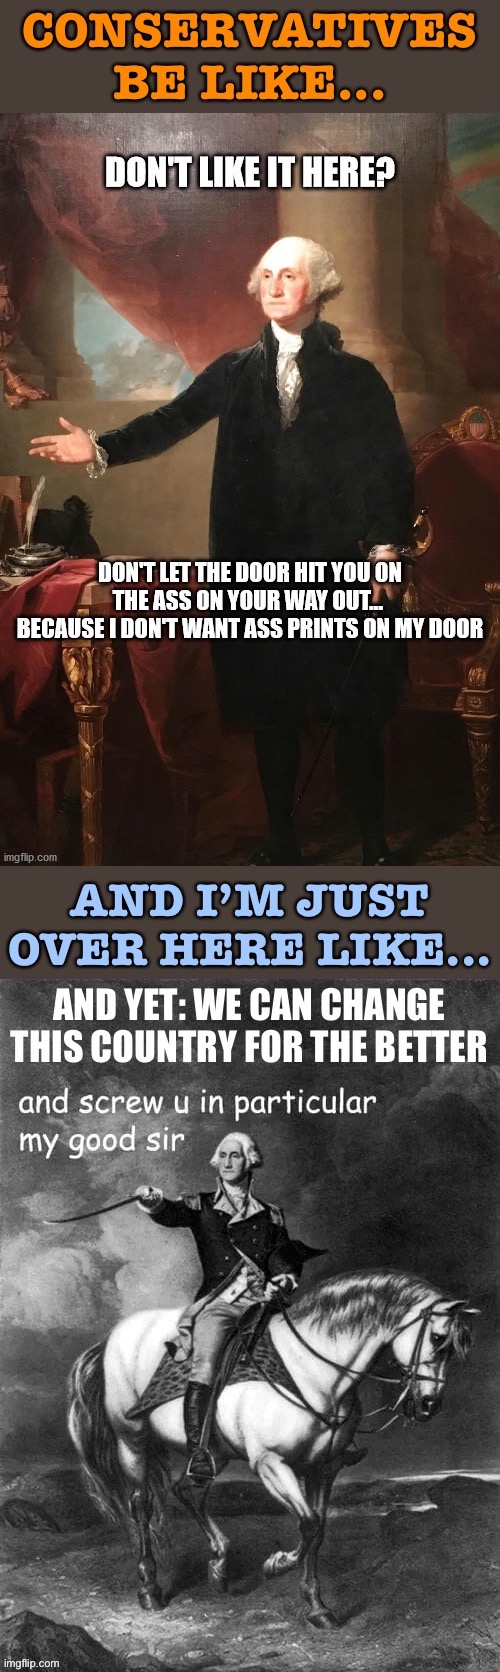 It is patriotic to identify issues, fight for change, and improve the country for all. | image tagged in government,conservative logic,george washington,patriotism,patriotic,america | made w/ Imgflip meme maker